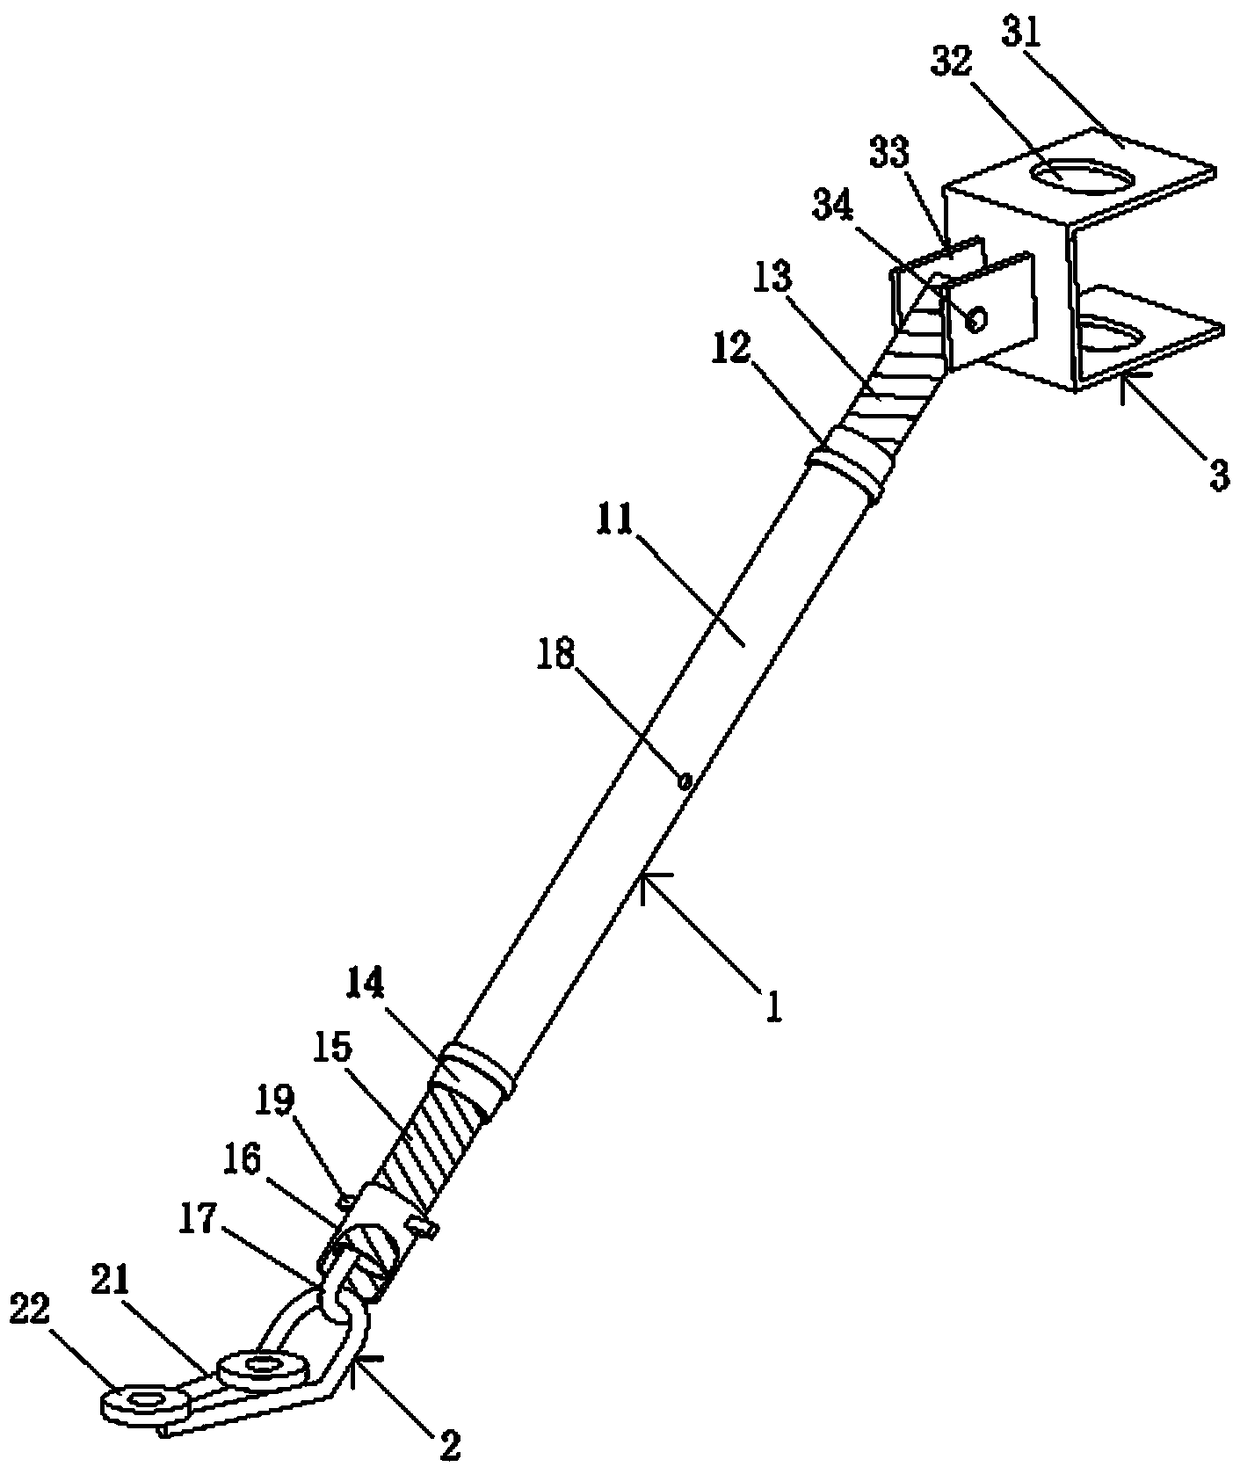 Diagonal bracing and pulling device used for supporting of cast-in-place concrete wall formwork